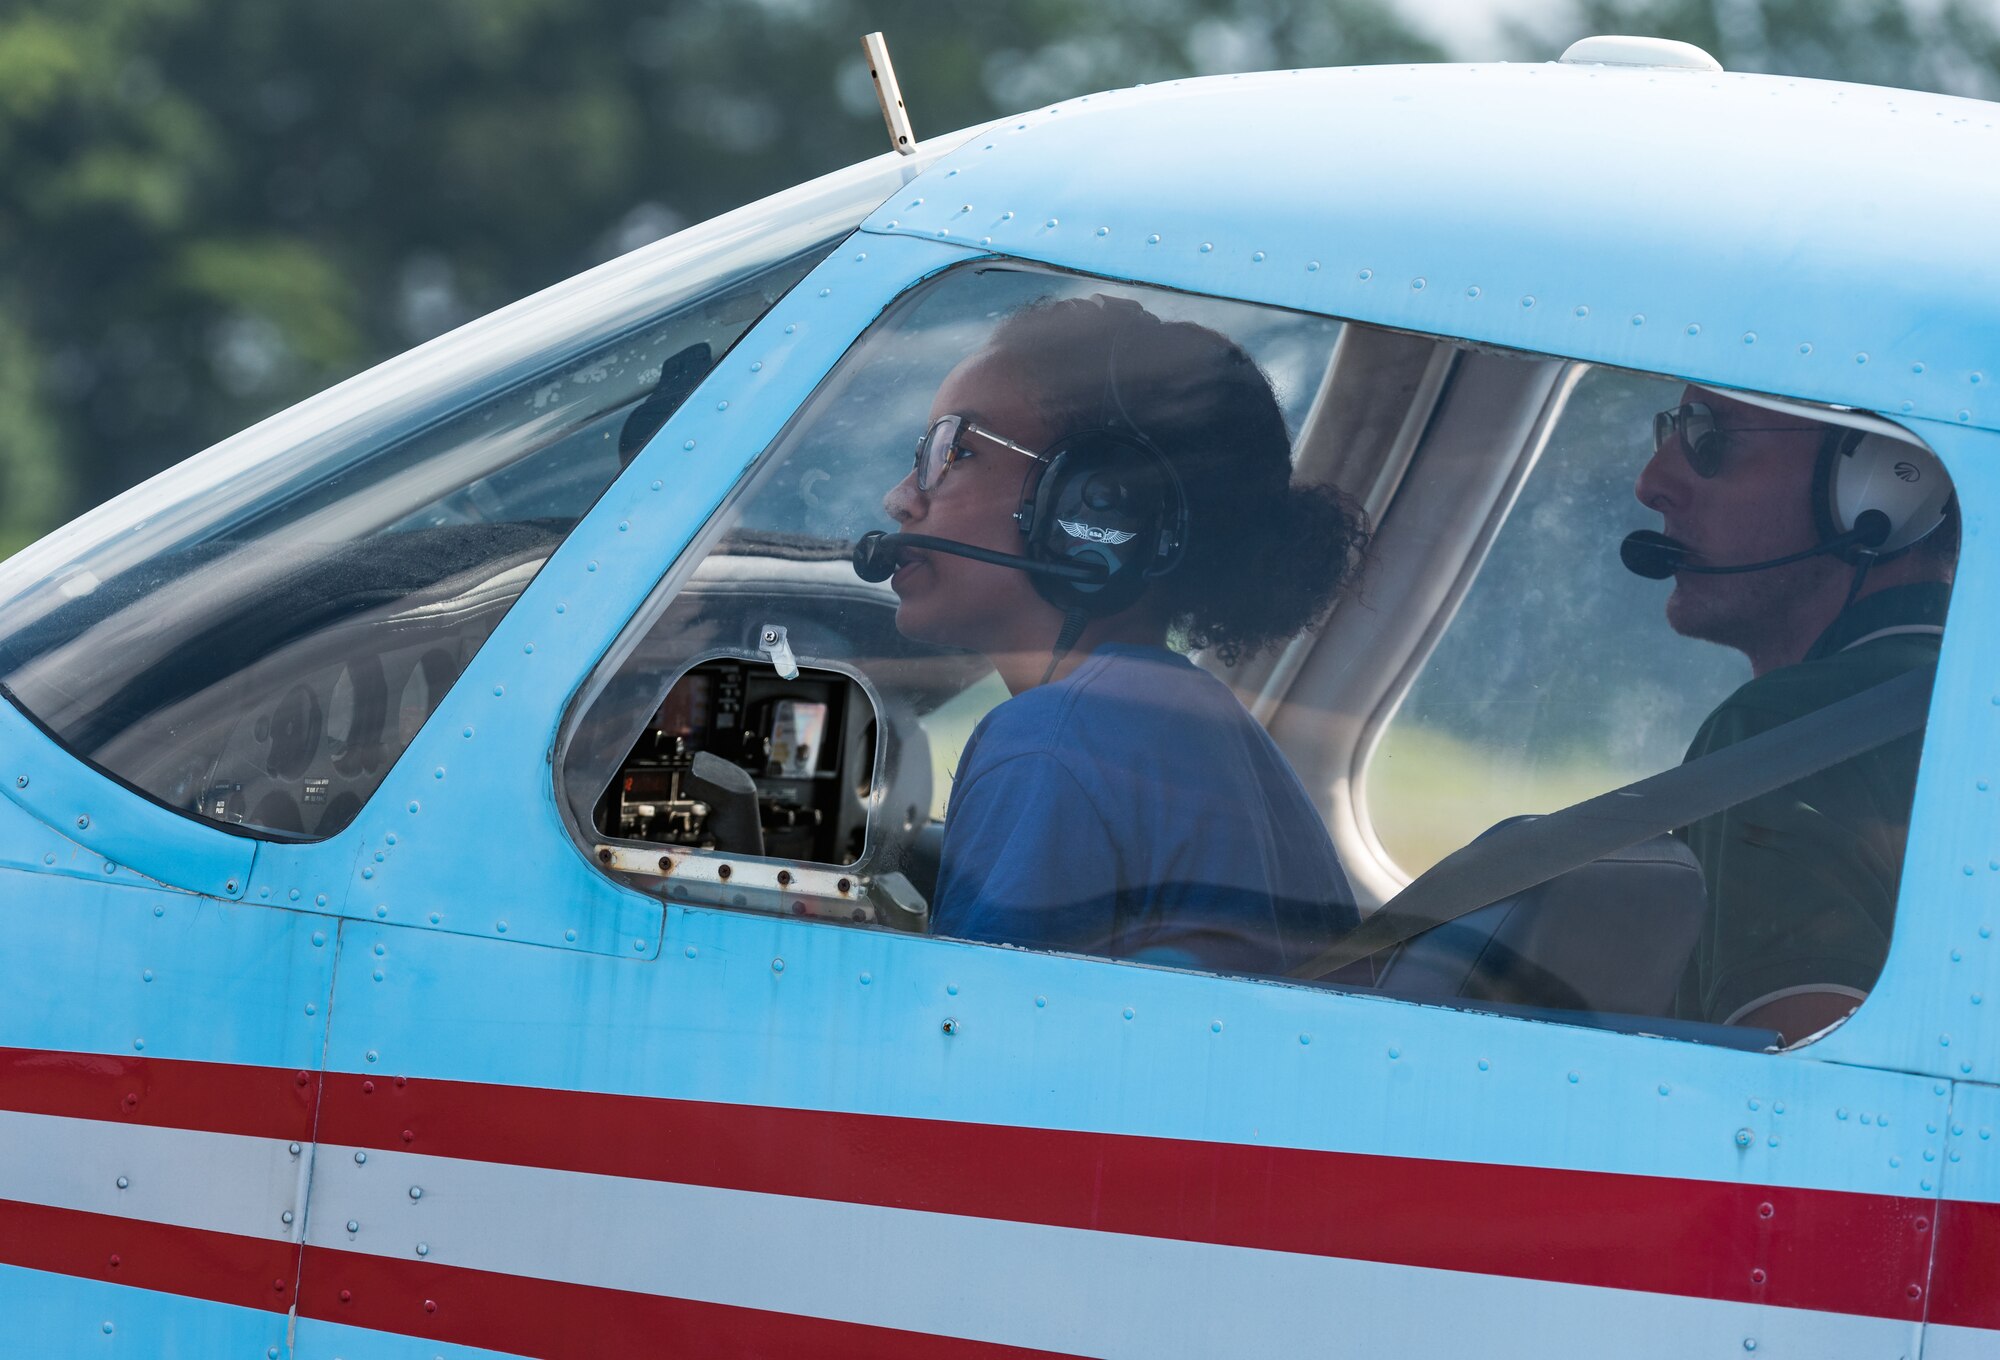 Air Force Junior ROTC cadet Maya Ross, prepares to taxi a Piper Warrior aircraft onto the runway Aug. 6, 2019, at Delaware Airpark in Cheswold, Del. Ross and her Delaware State University certified flight instructor flew around the airpark and practiced skills she learned during the eight-week AFJROTC Summer Flight Academy held at DSU. Ross is a cadet with AFJROTC Detachment BE-931, SHAPE American High School, Mons, Belgium. (U.S. Air Force photo by Roland Balik)